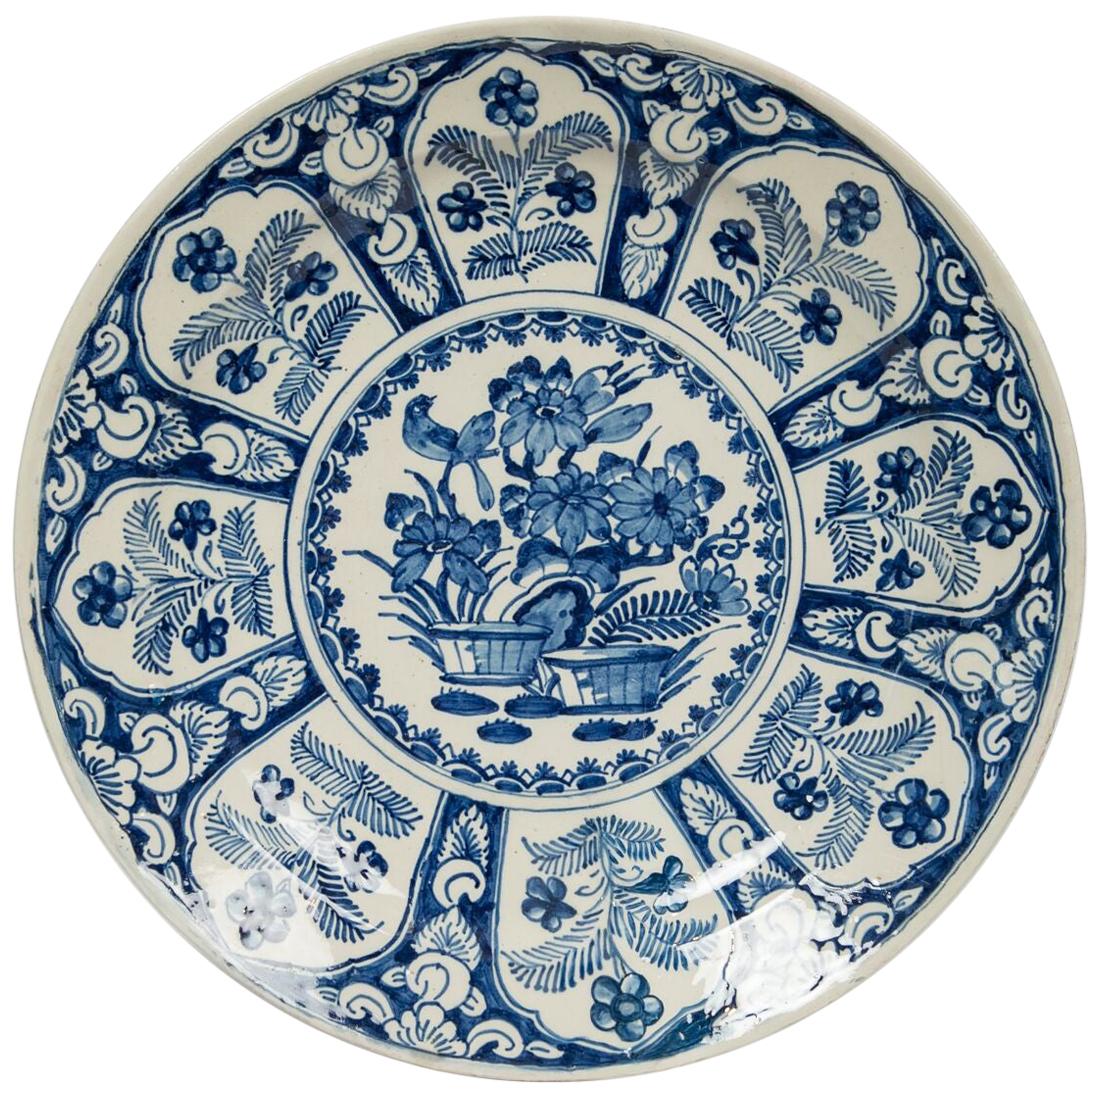 Delft Blue and White Charger Featuring Flowers and a Songbird 18th Century